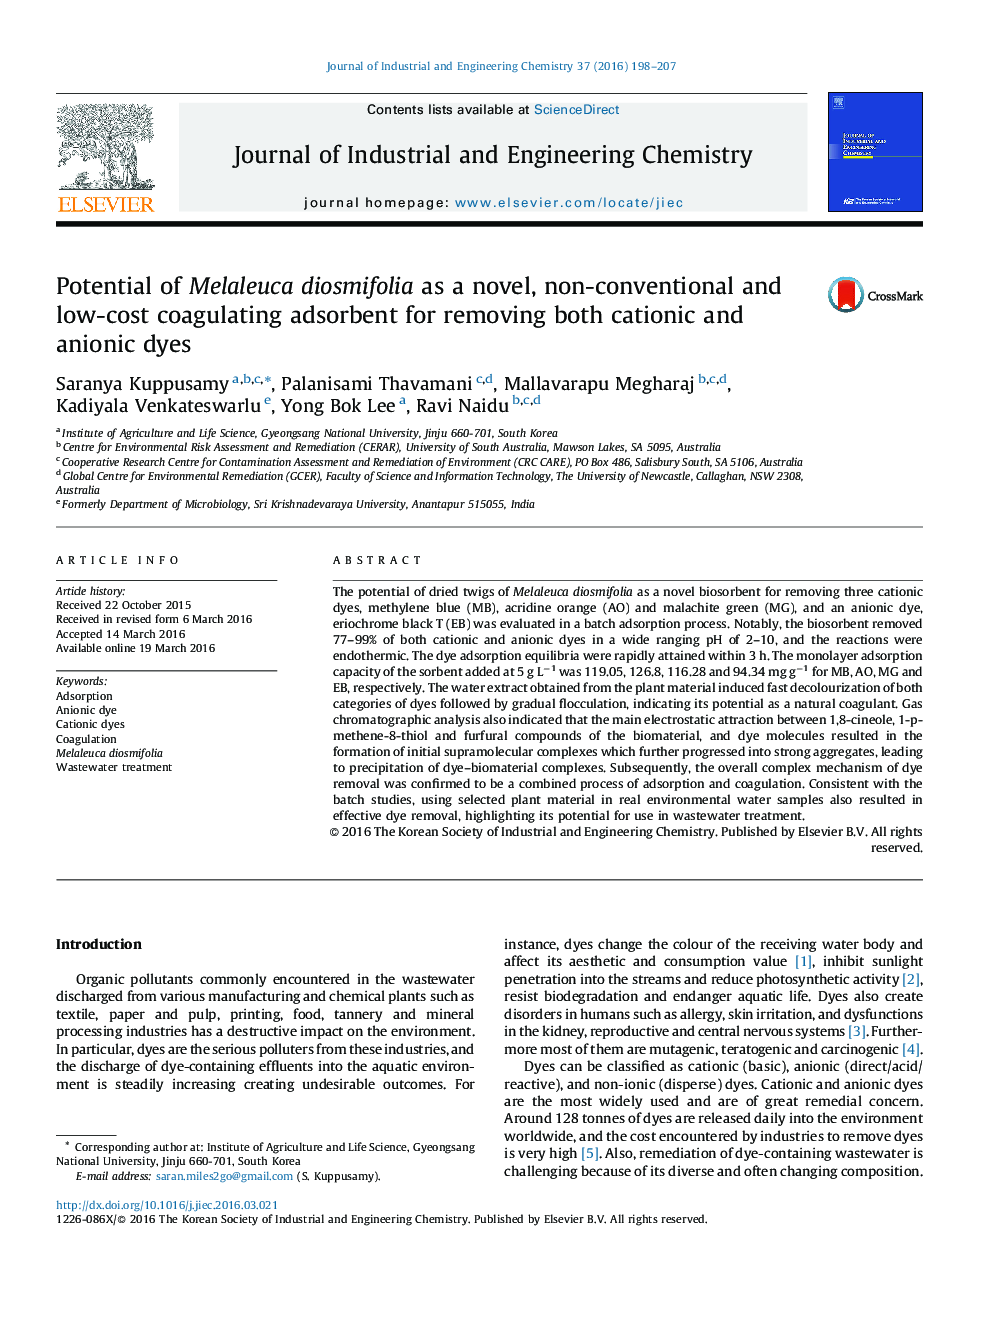 Potential of Melaleuca diosmifolia as a novel, non-conventional and low-cost coagulating adsorbent for removing both cationic and anionic dyes